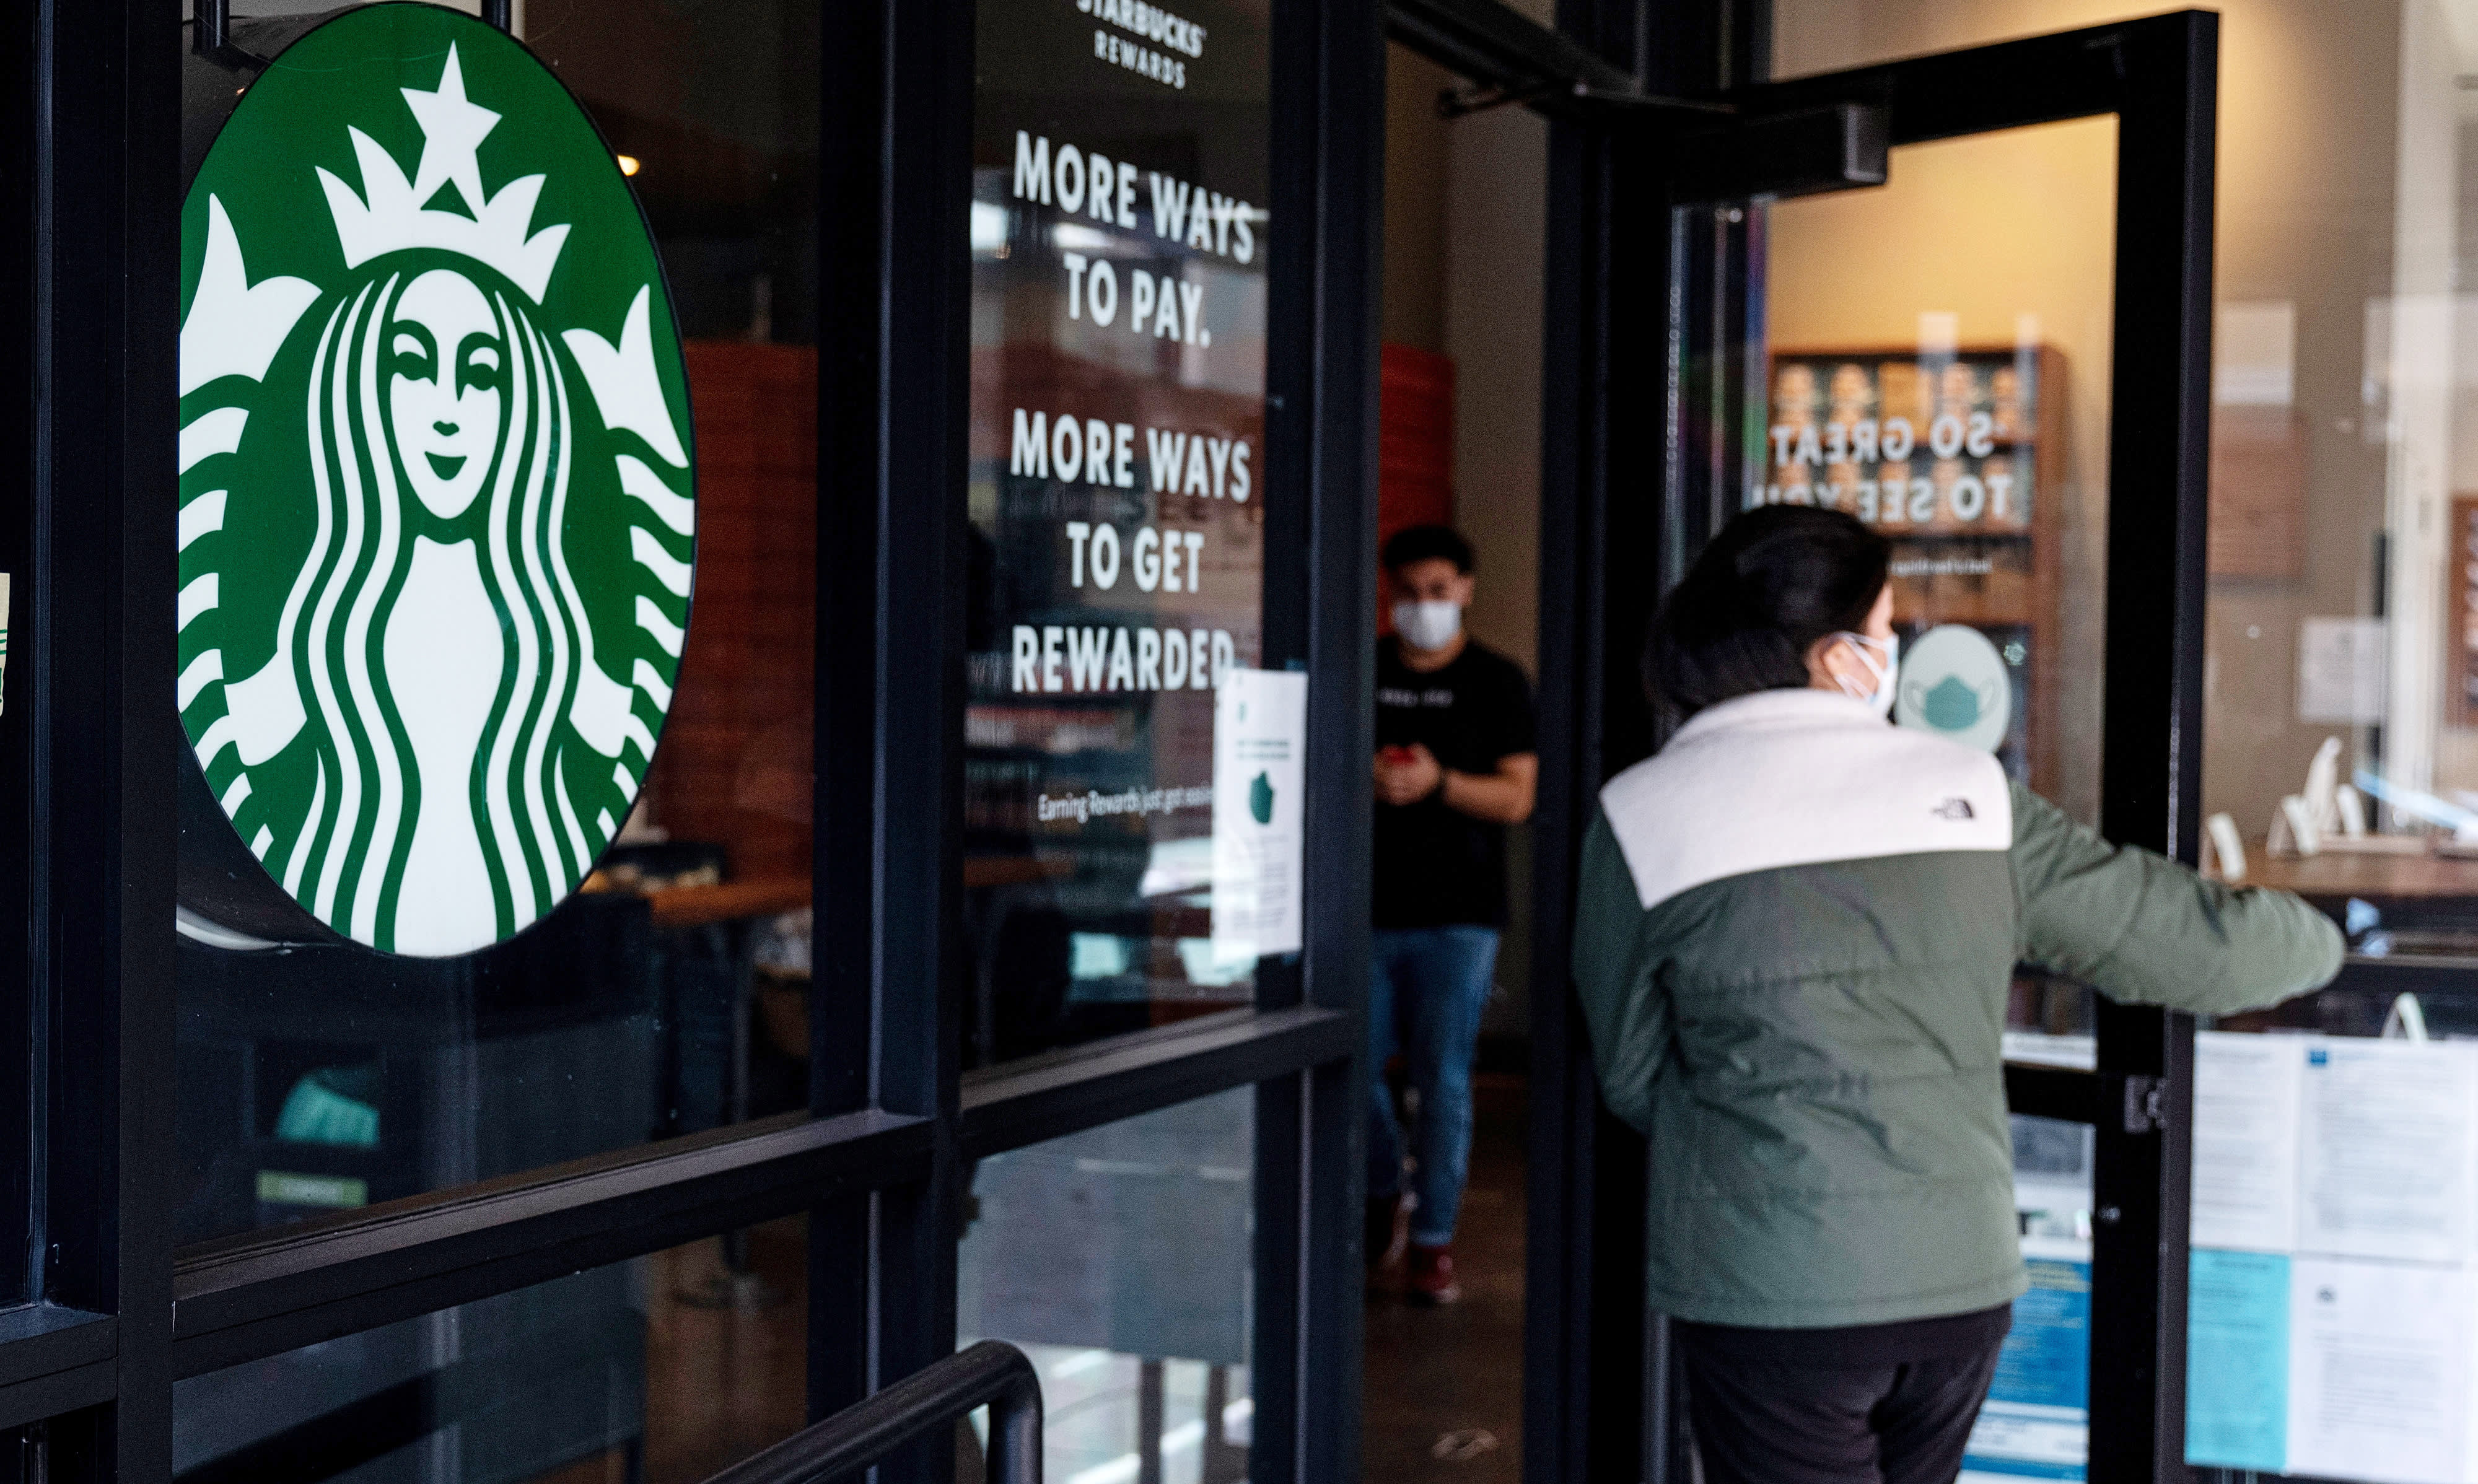 The New Starbucks CEO Has the Consumer Experience the Coffee Chain Needs